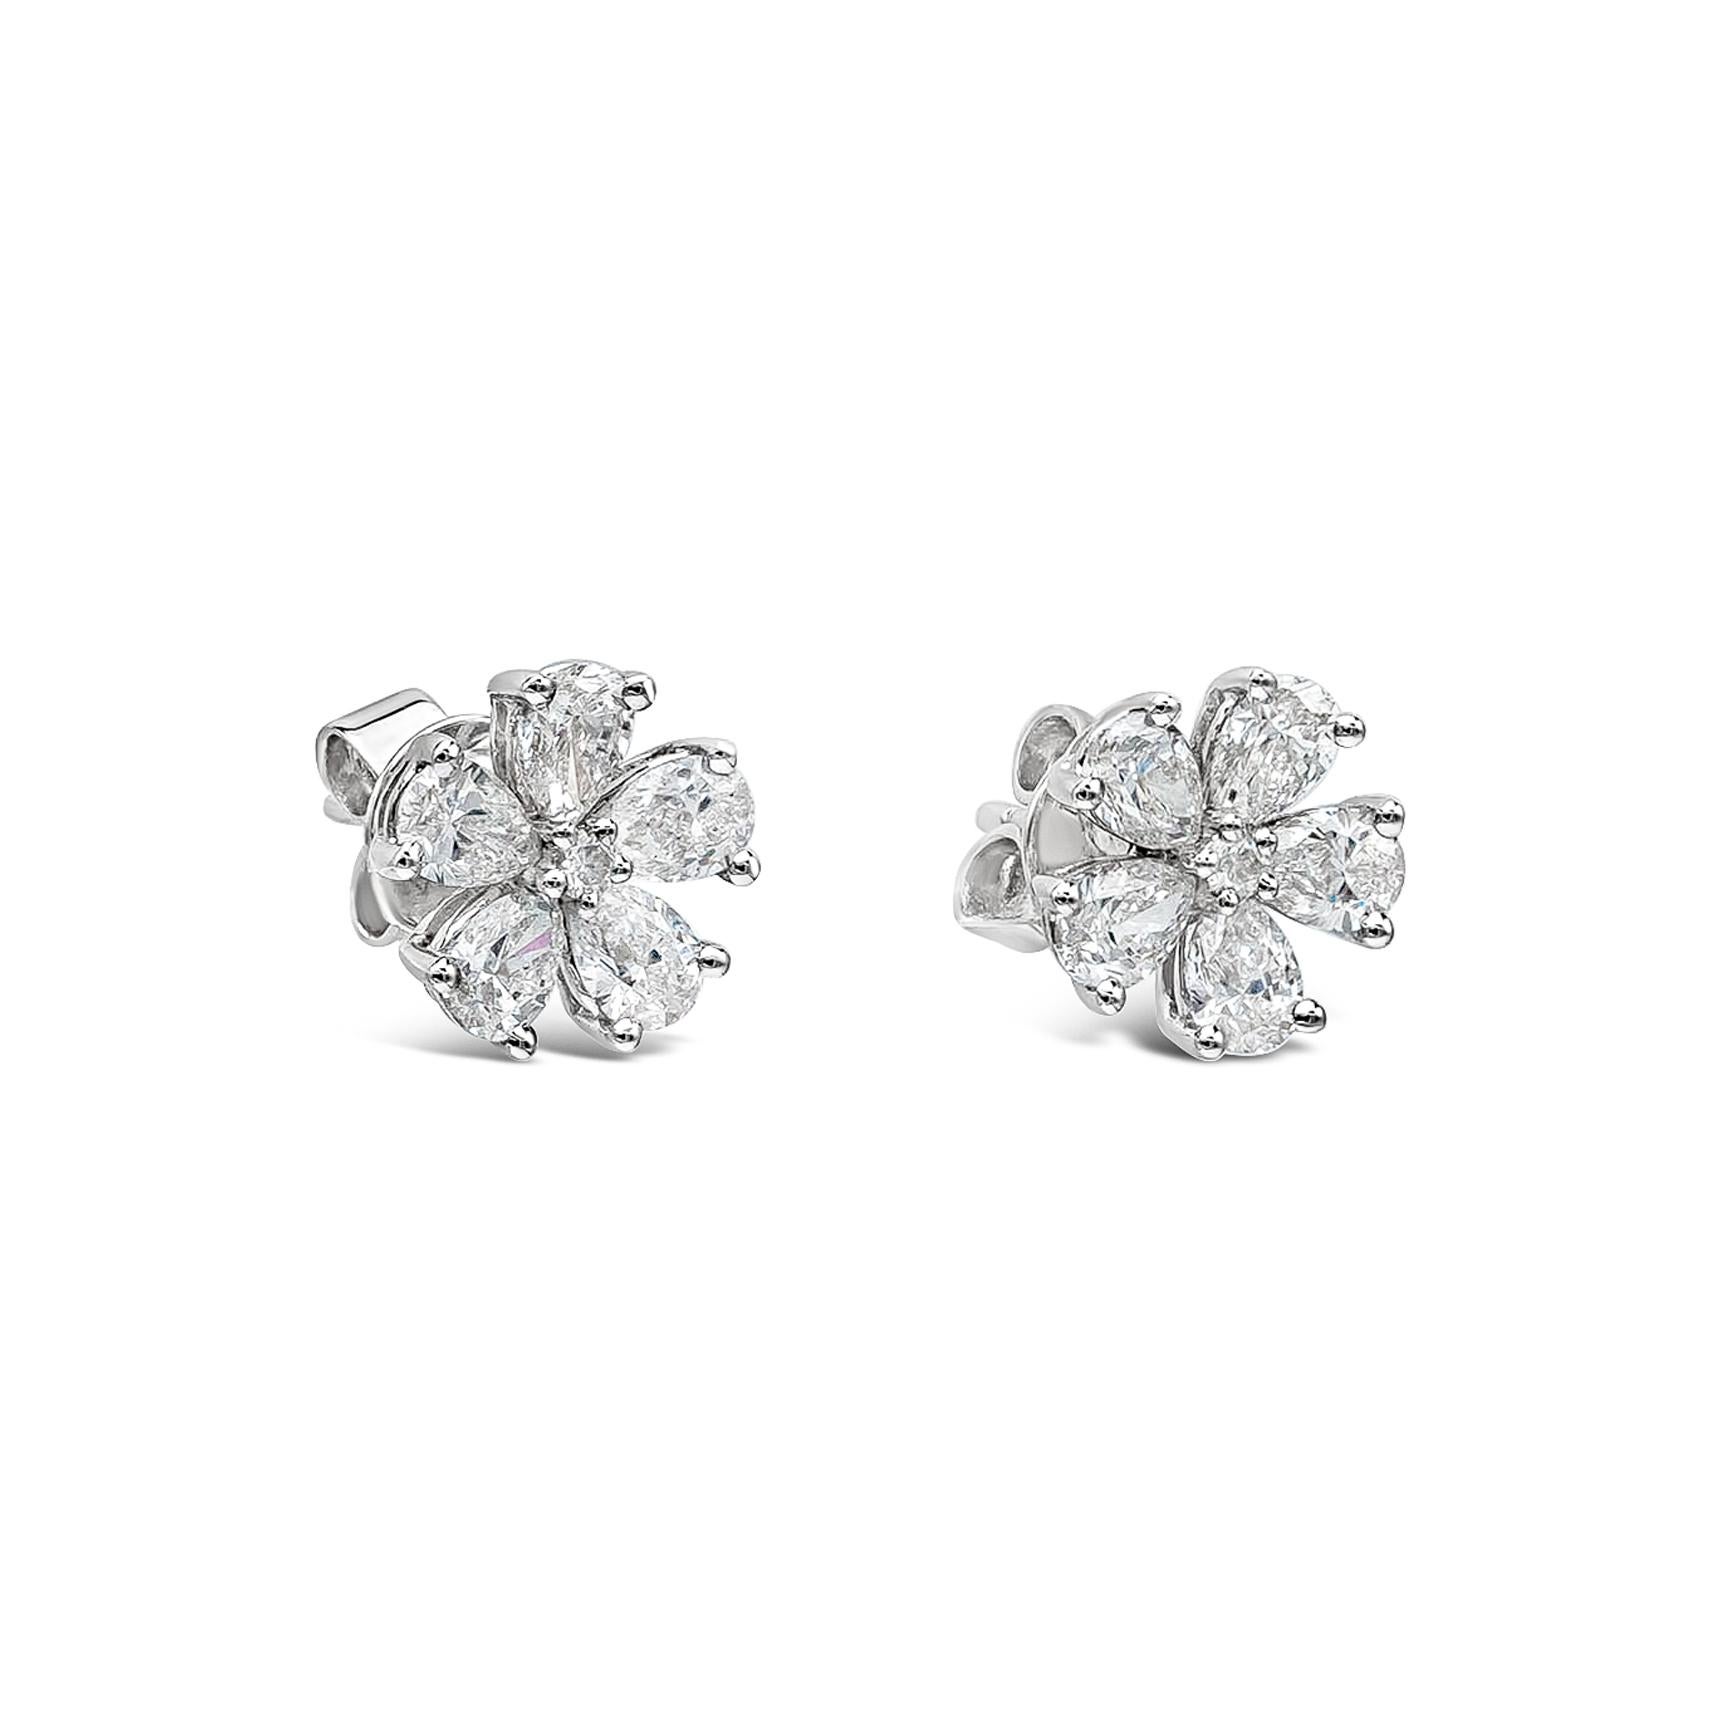 A very beautiful pair of stud earrings featuring a round brilliant diamond center, accented with brilliant pear shape diamonds set in a beautiful loral-motif design. Made in 18k white gold.

Style available in different price ranges. Prices are